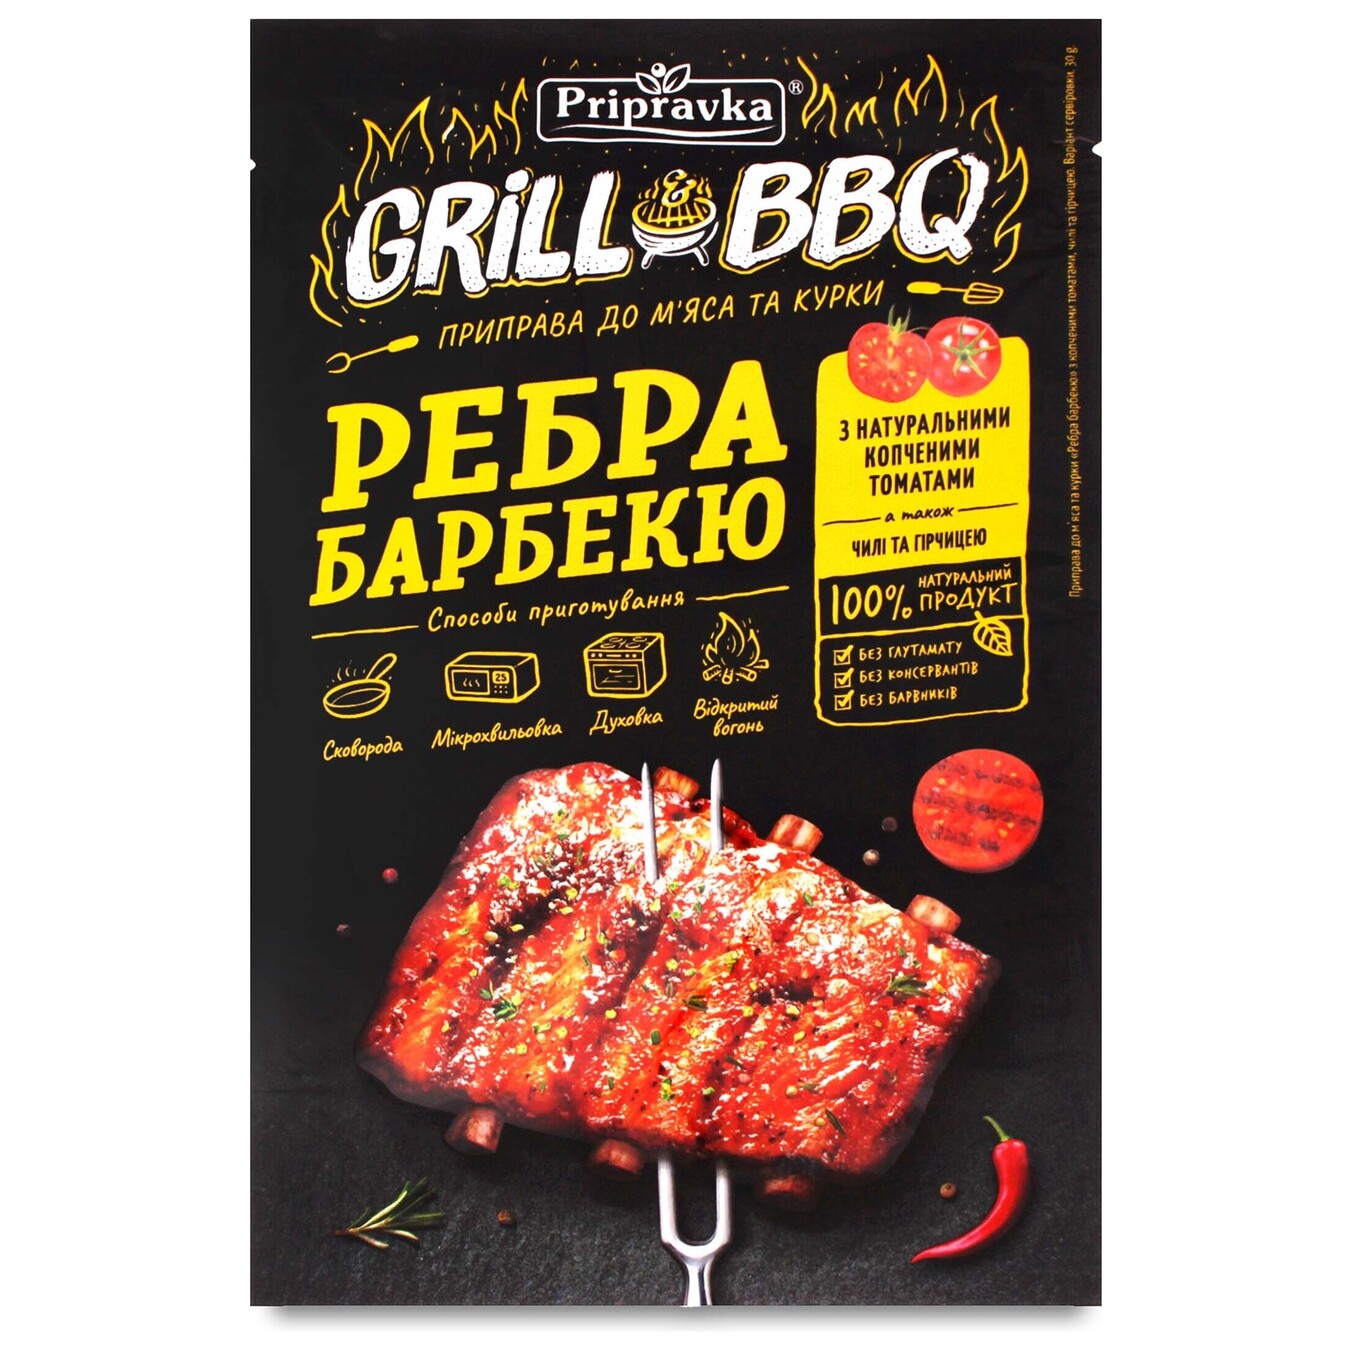 Pripravka Grill & BBQ seasoning for meat and chicken BBQ ribs with smoked chili tomatoes and mustard 30g